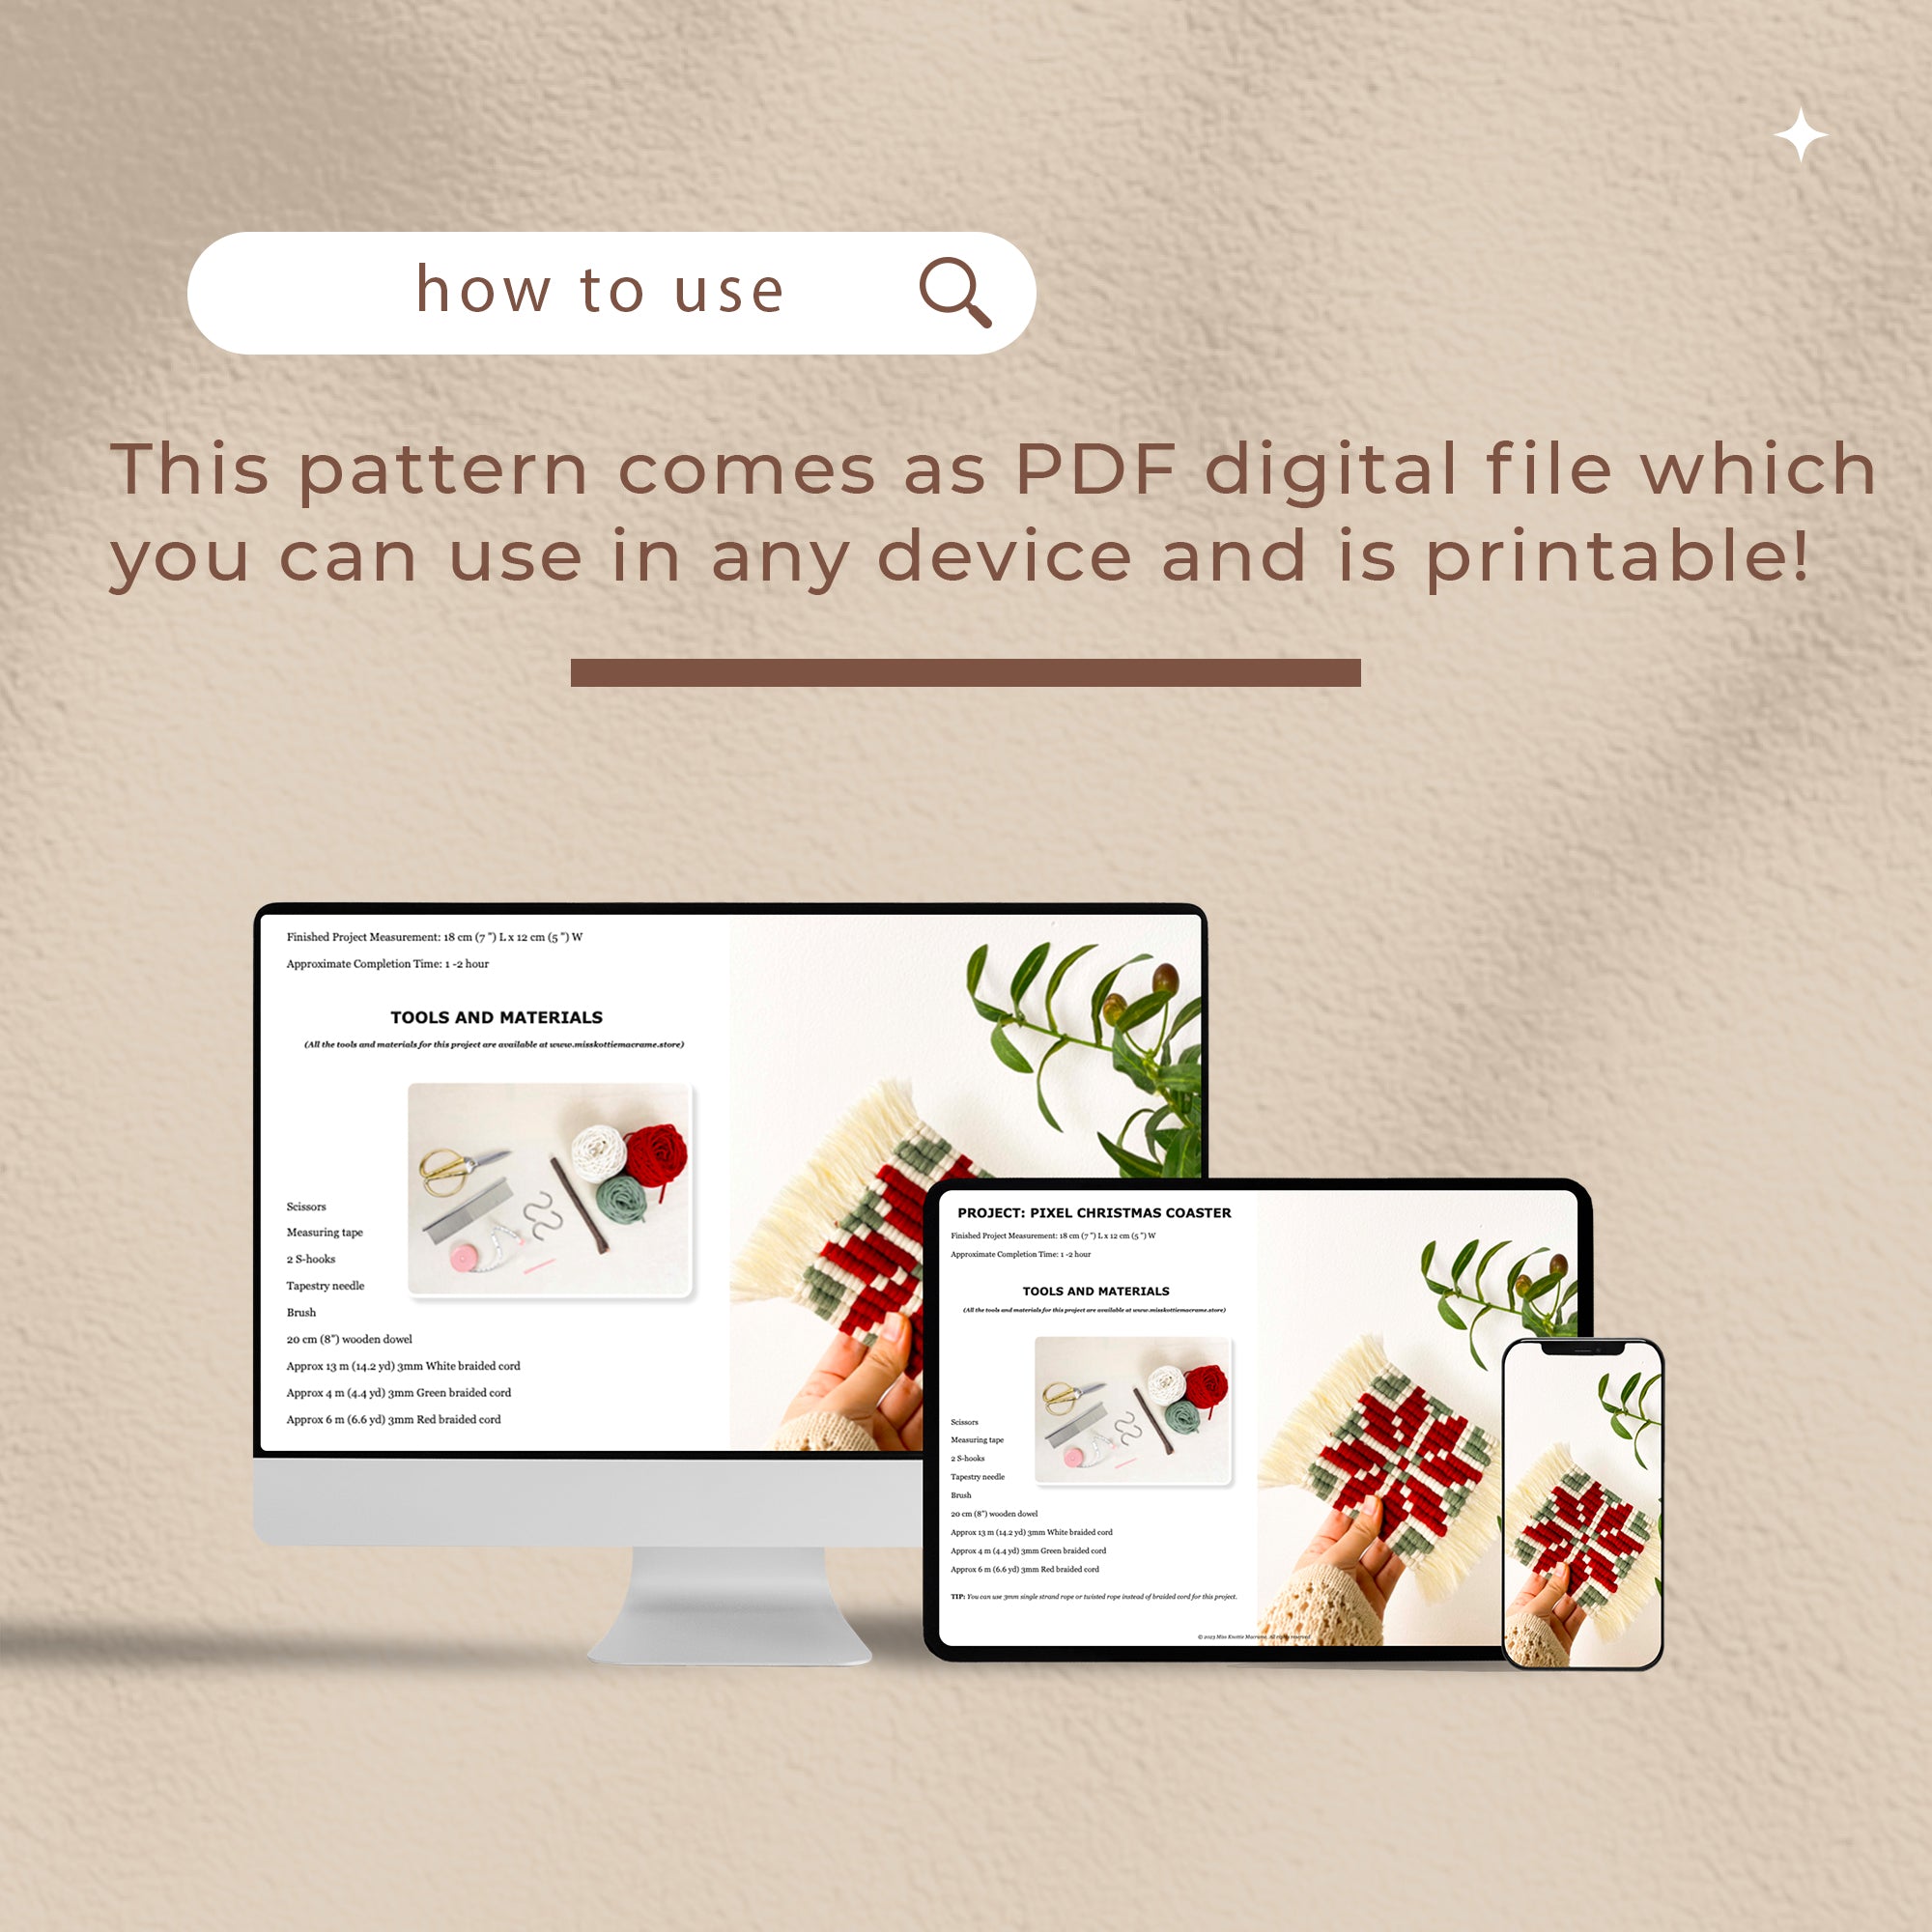 Pixel Christmas Coaster Pattern - Digital PDF and Knot Guide